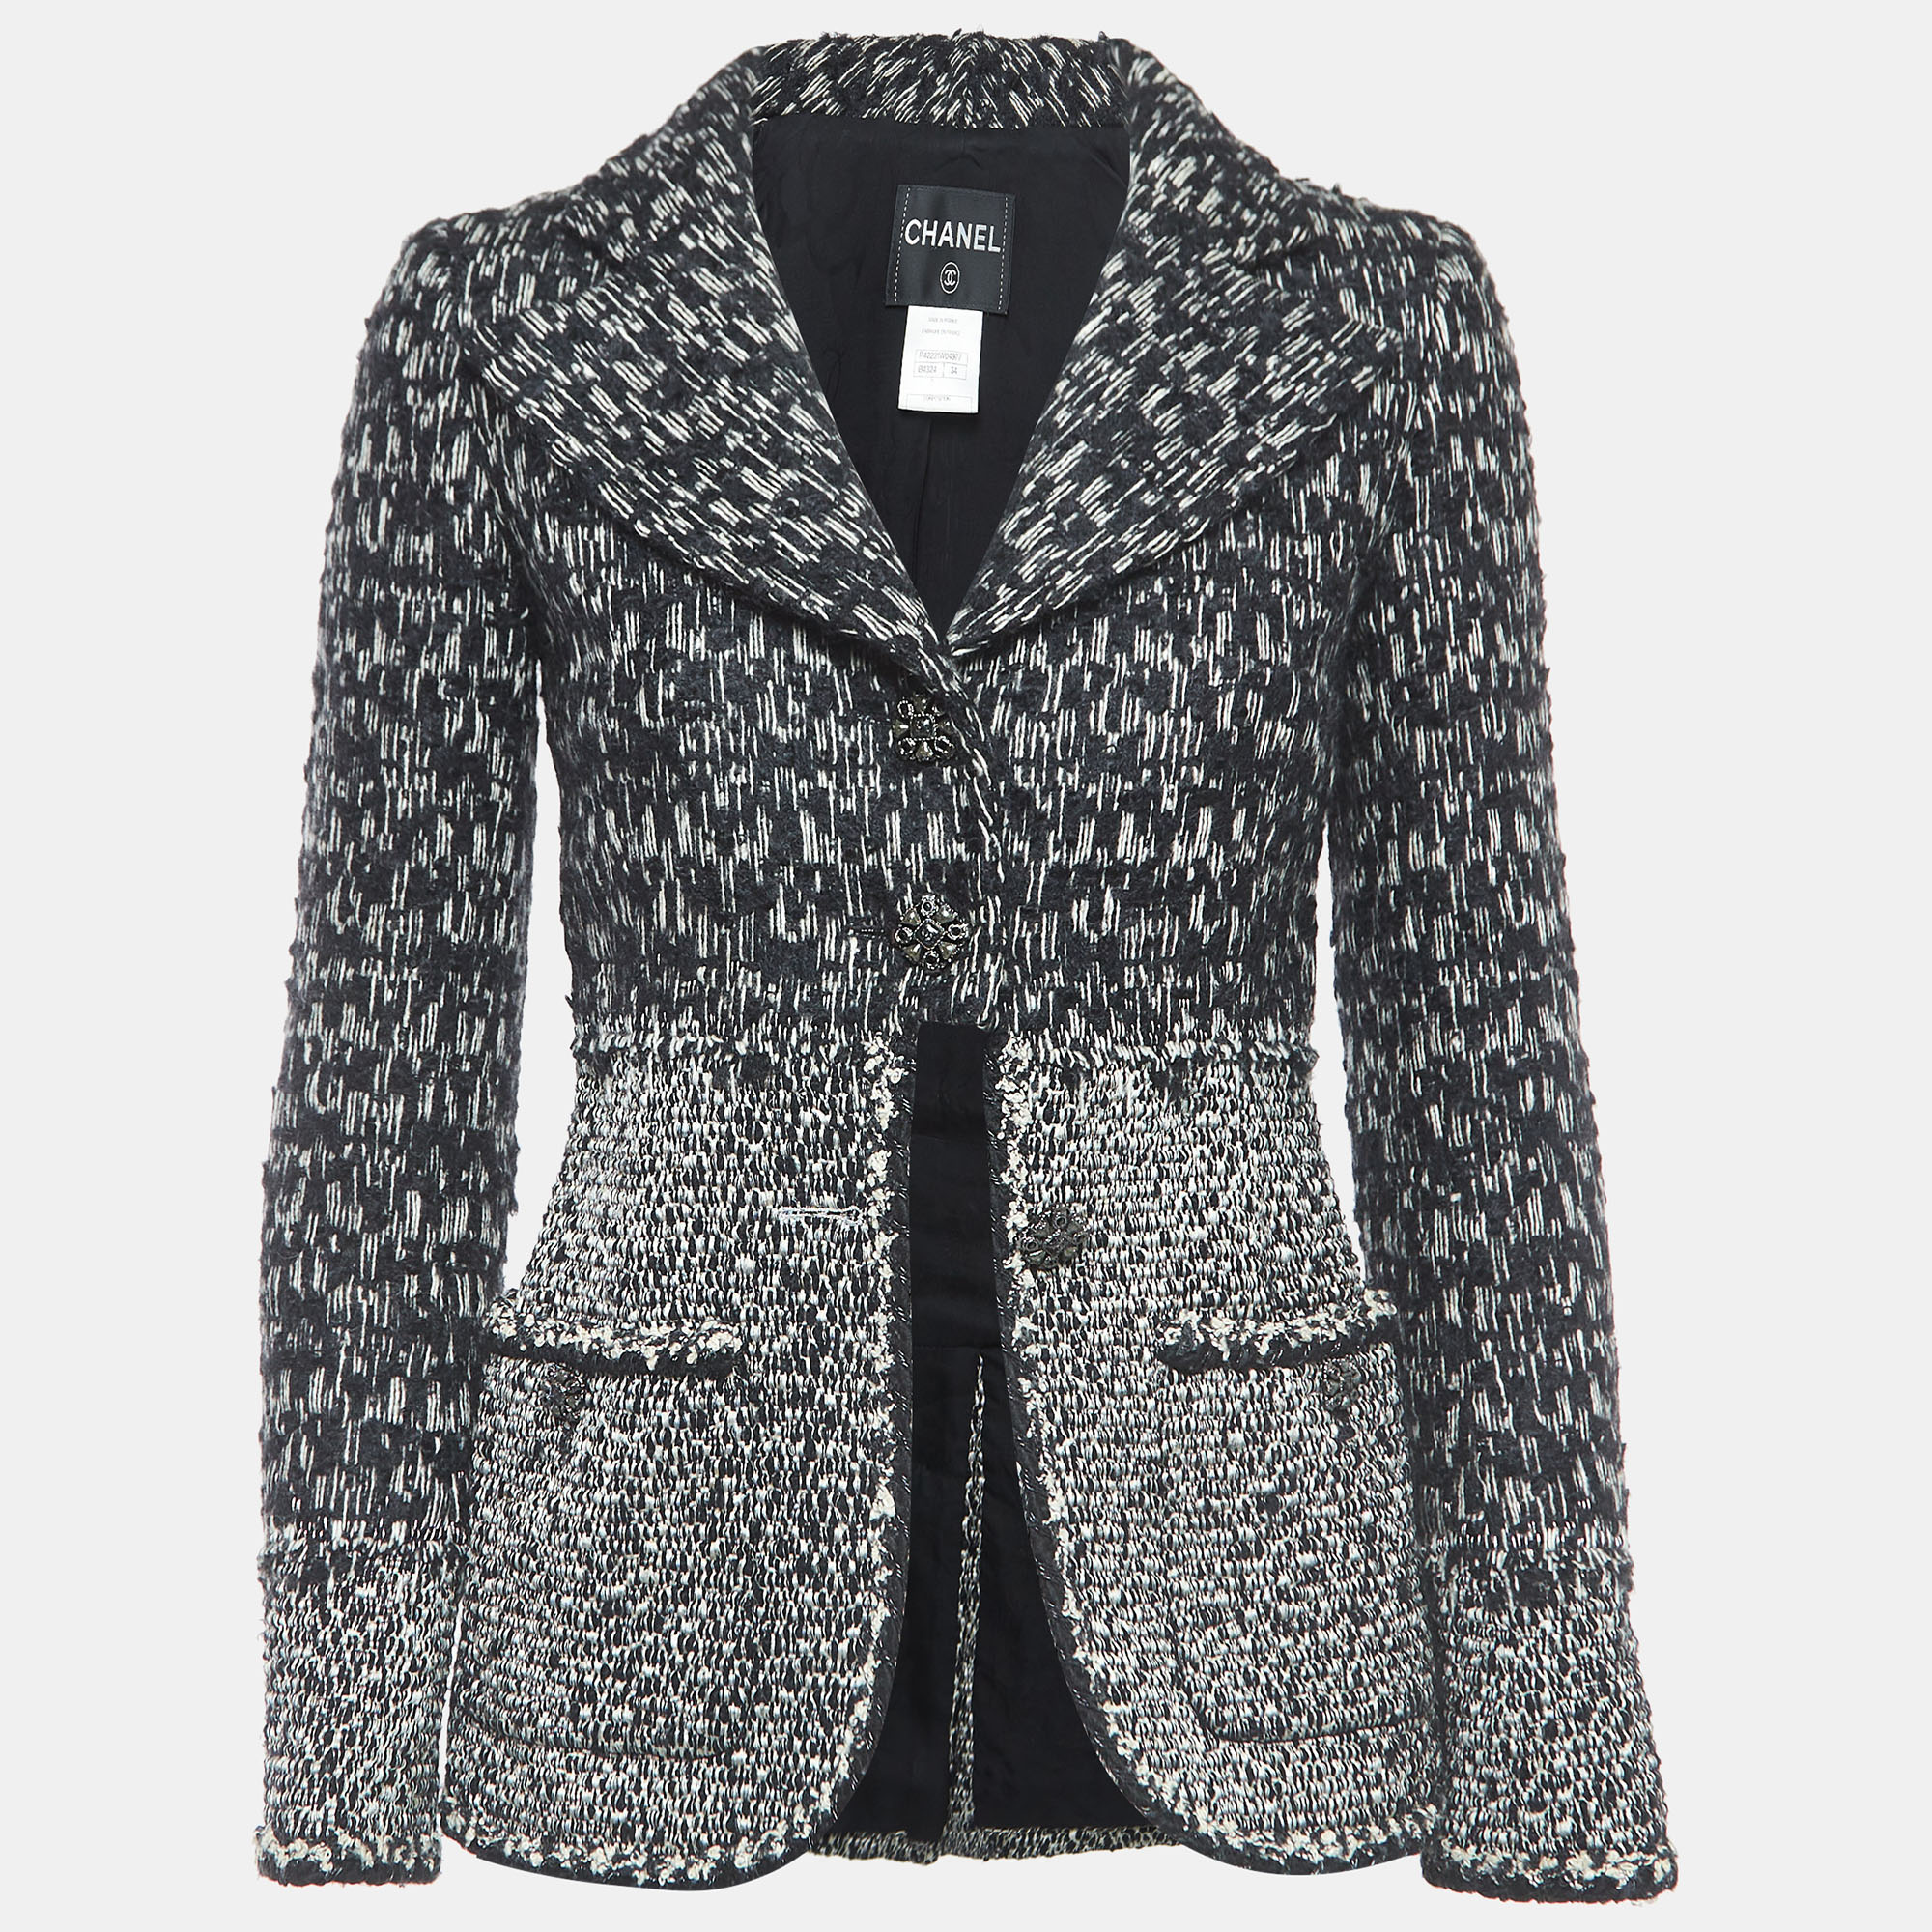 

Chanel Black/White Boucle Tweed Buttoned Jacket